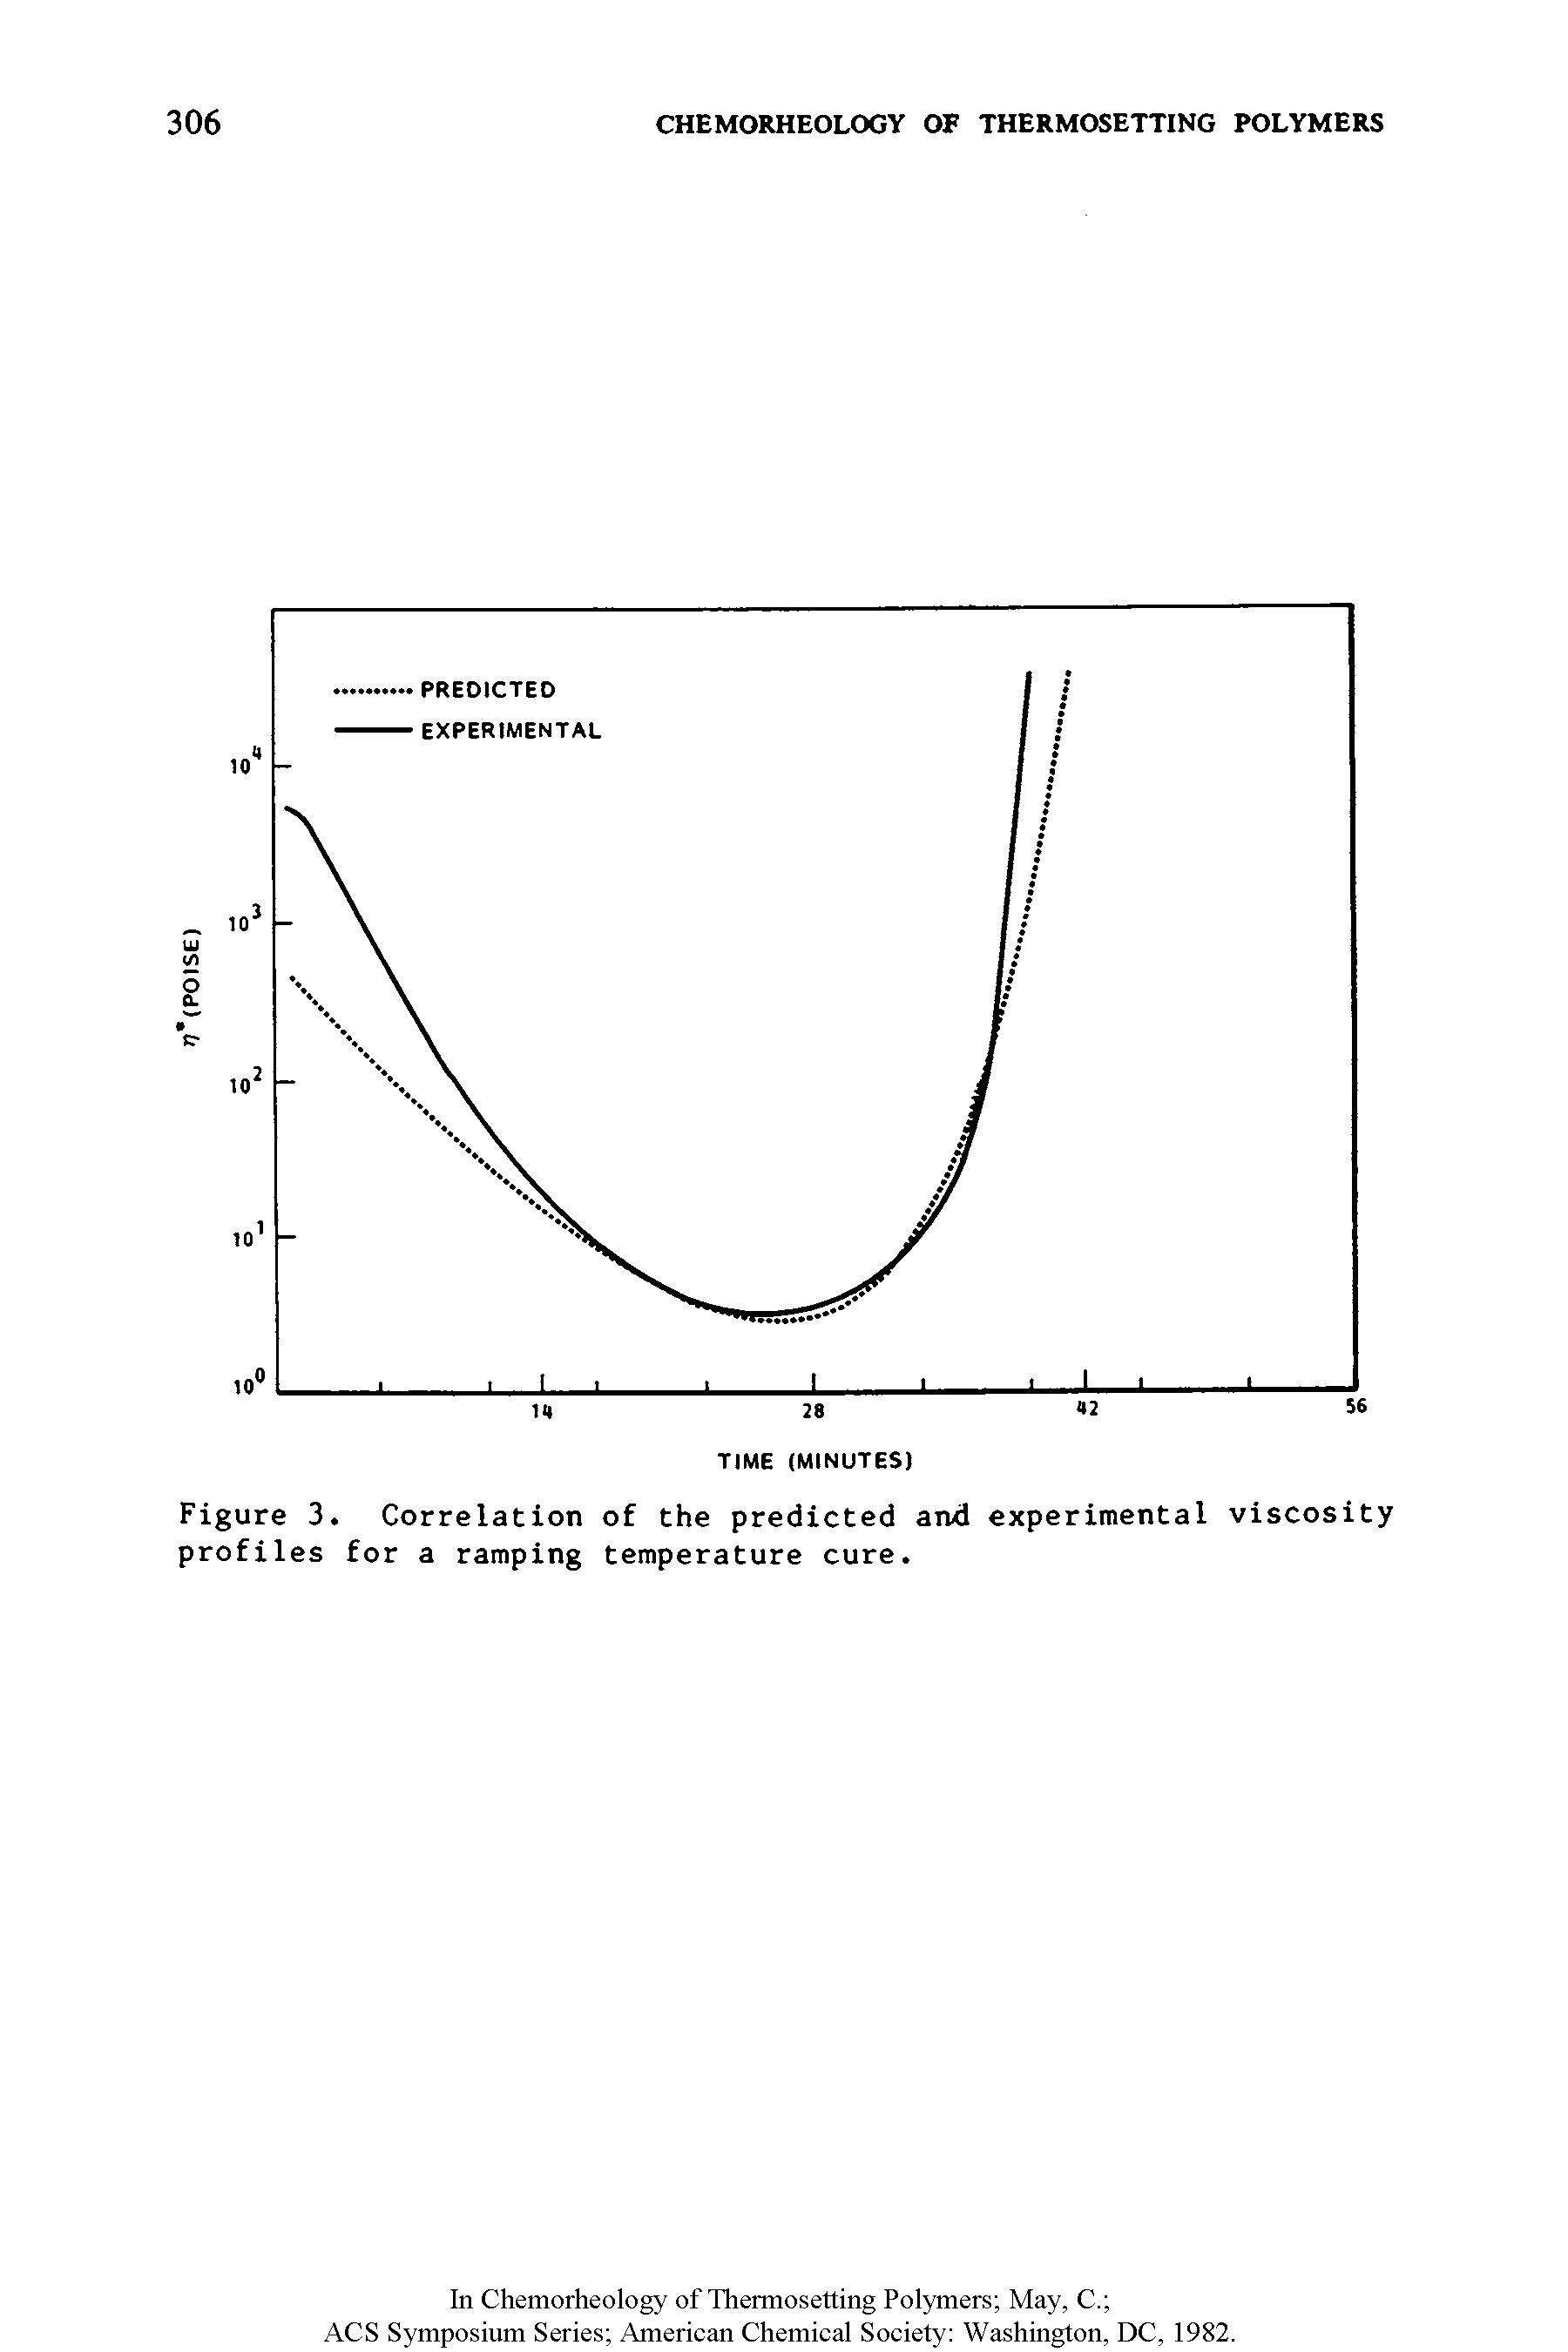 Figure 3. Correlation of the predicteci and experimental viscosity profiles for a ramping temperature cure.